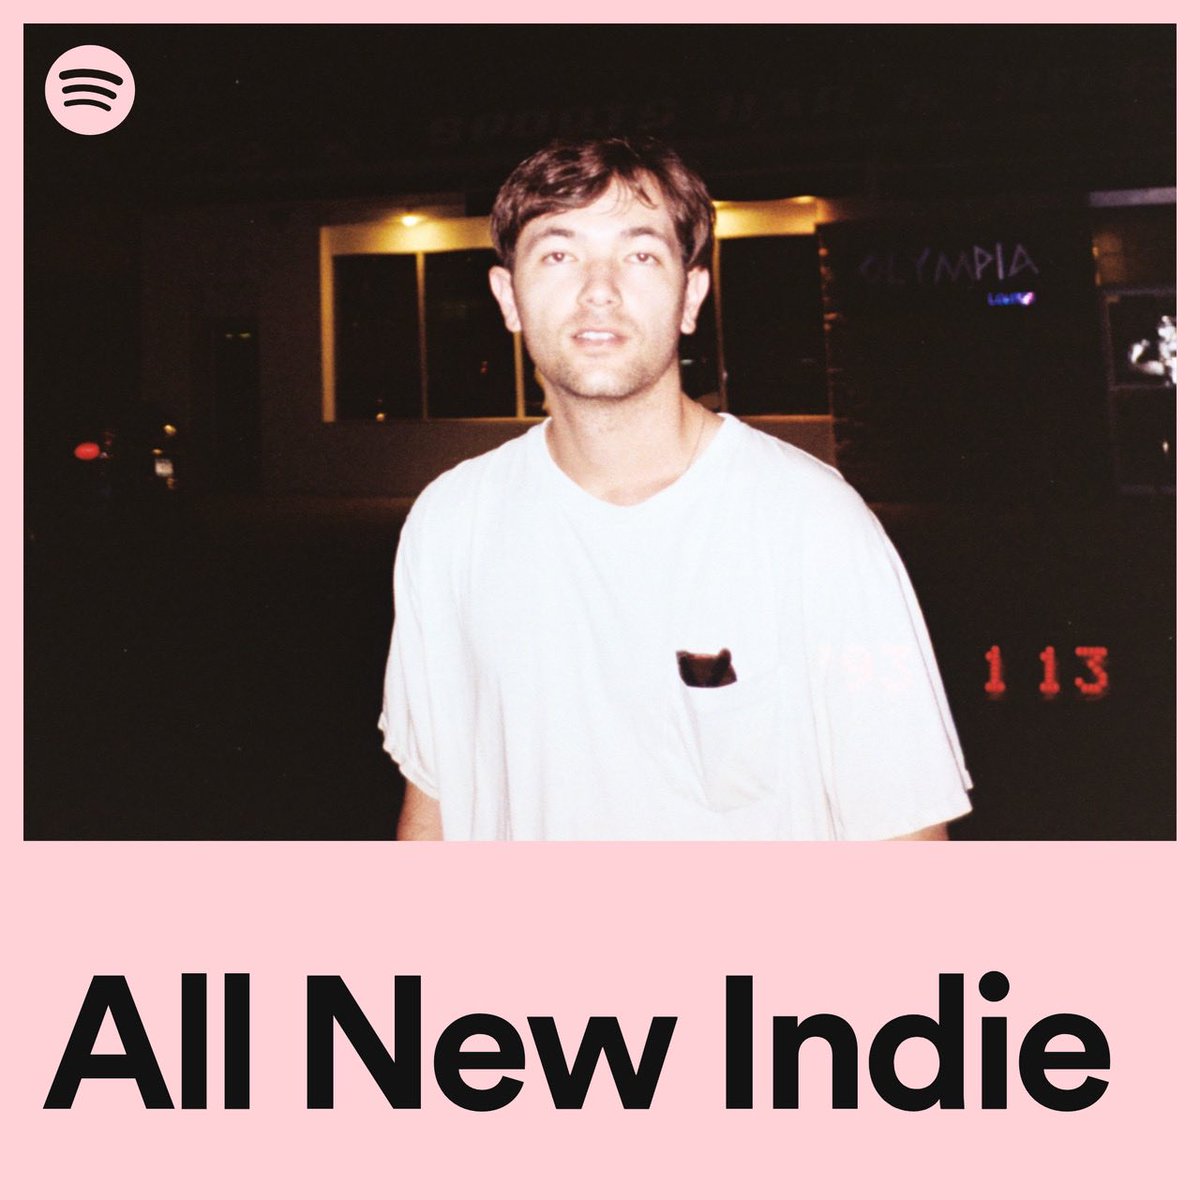 New album ‘Half Life’ out now on @spiritgoth - 12 diy-recorded tracks written / produced by me in the garage 🎧 sg47.fanlink.to/half-life Also currently on the cover of ‘All New Indie’ @Spotify playlist! open.spotify.com/playlist/37i9d…